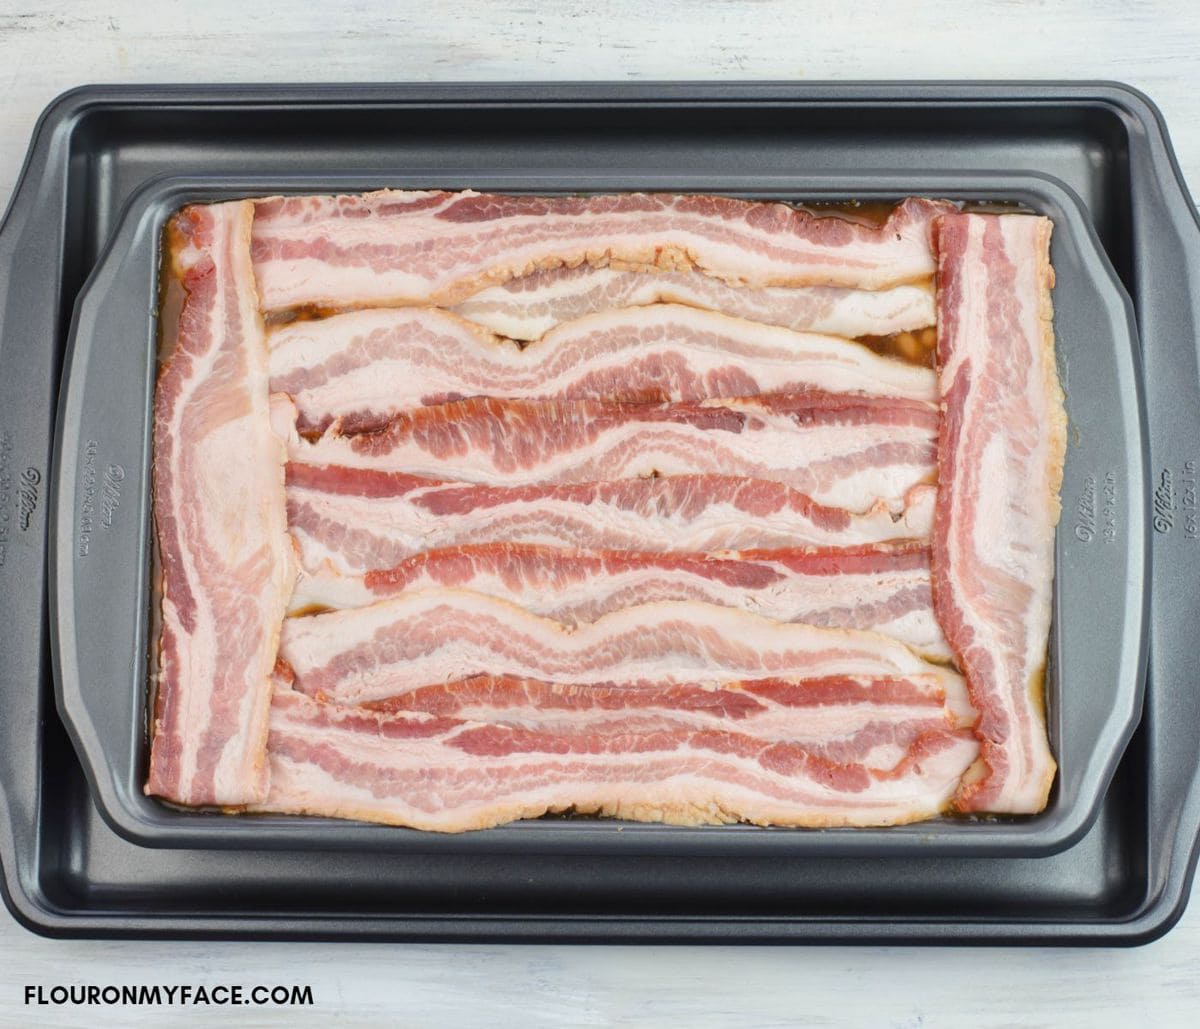 A tray of baled beans with sliced bacon on top.